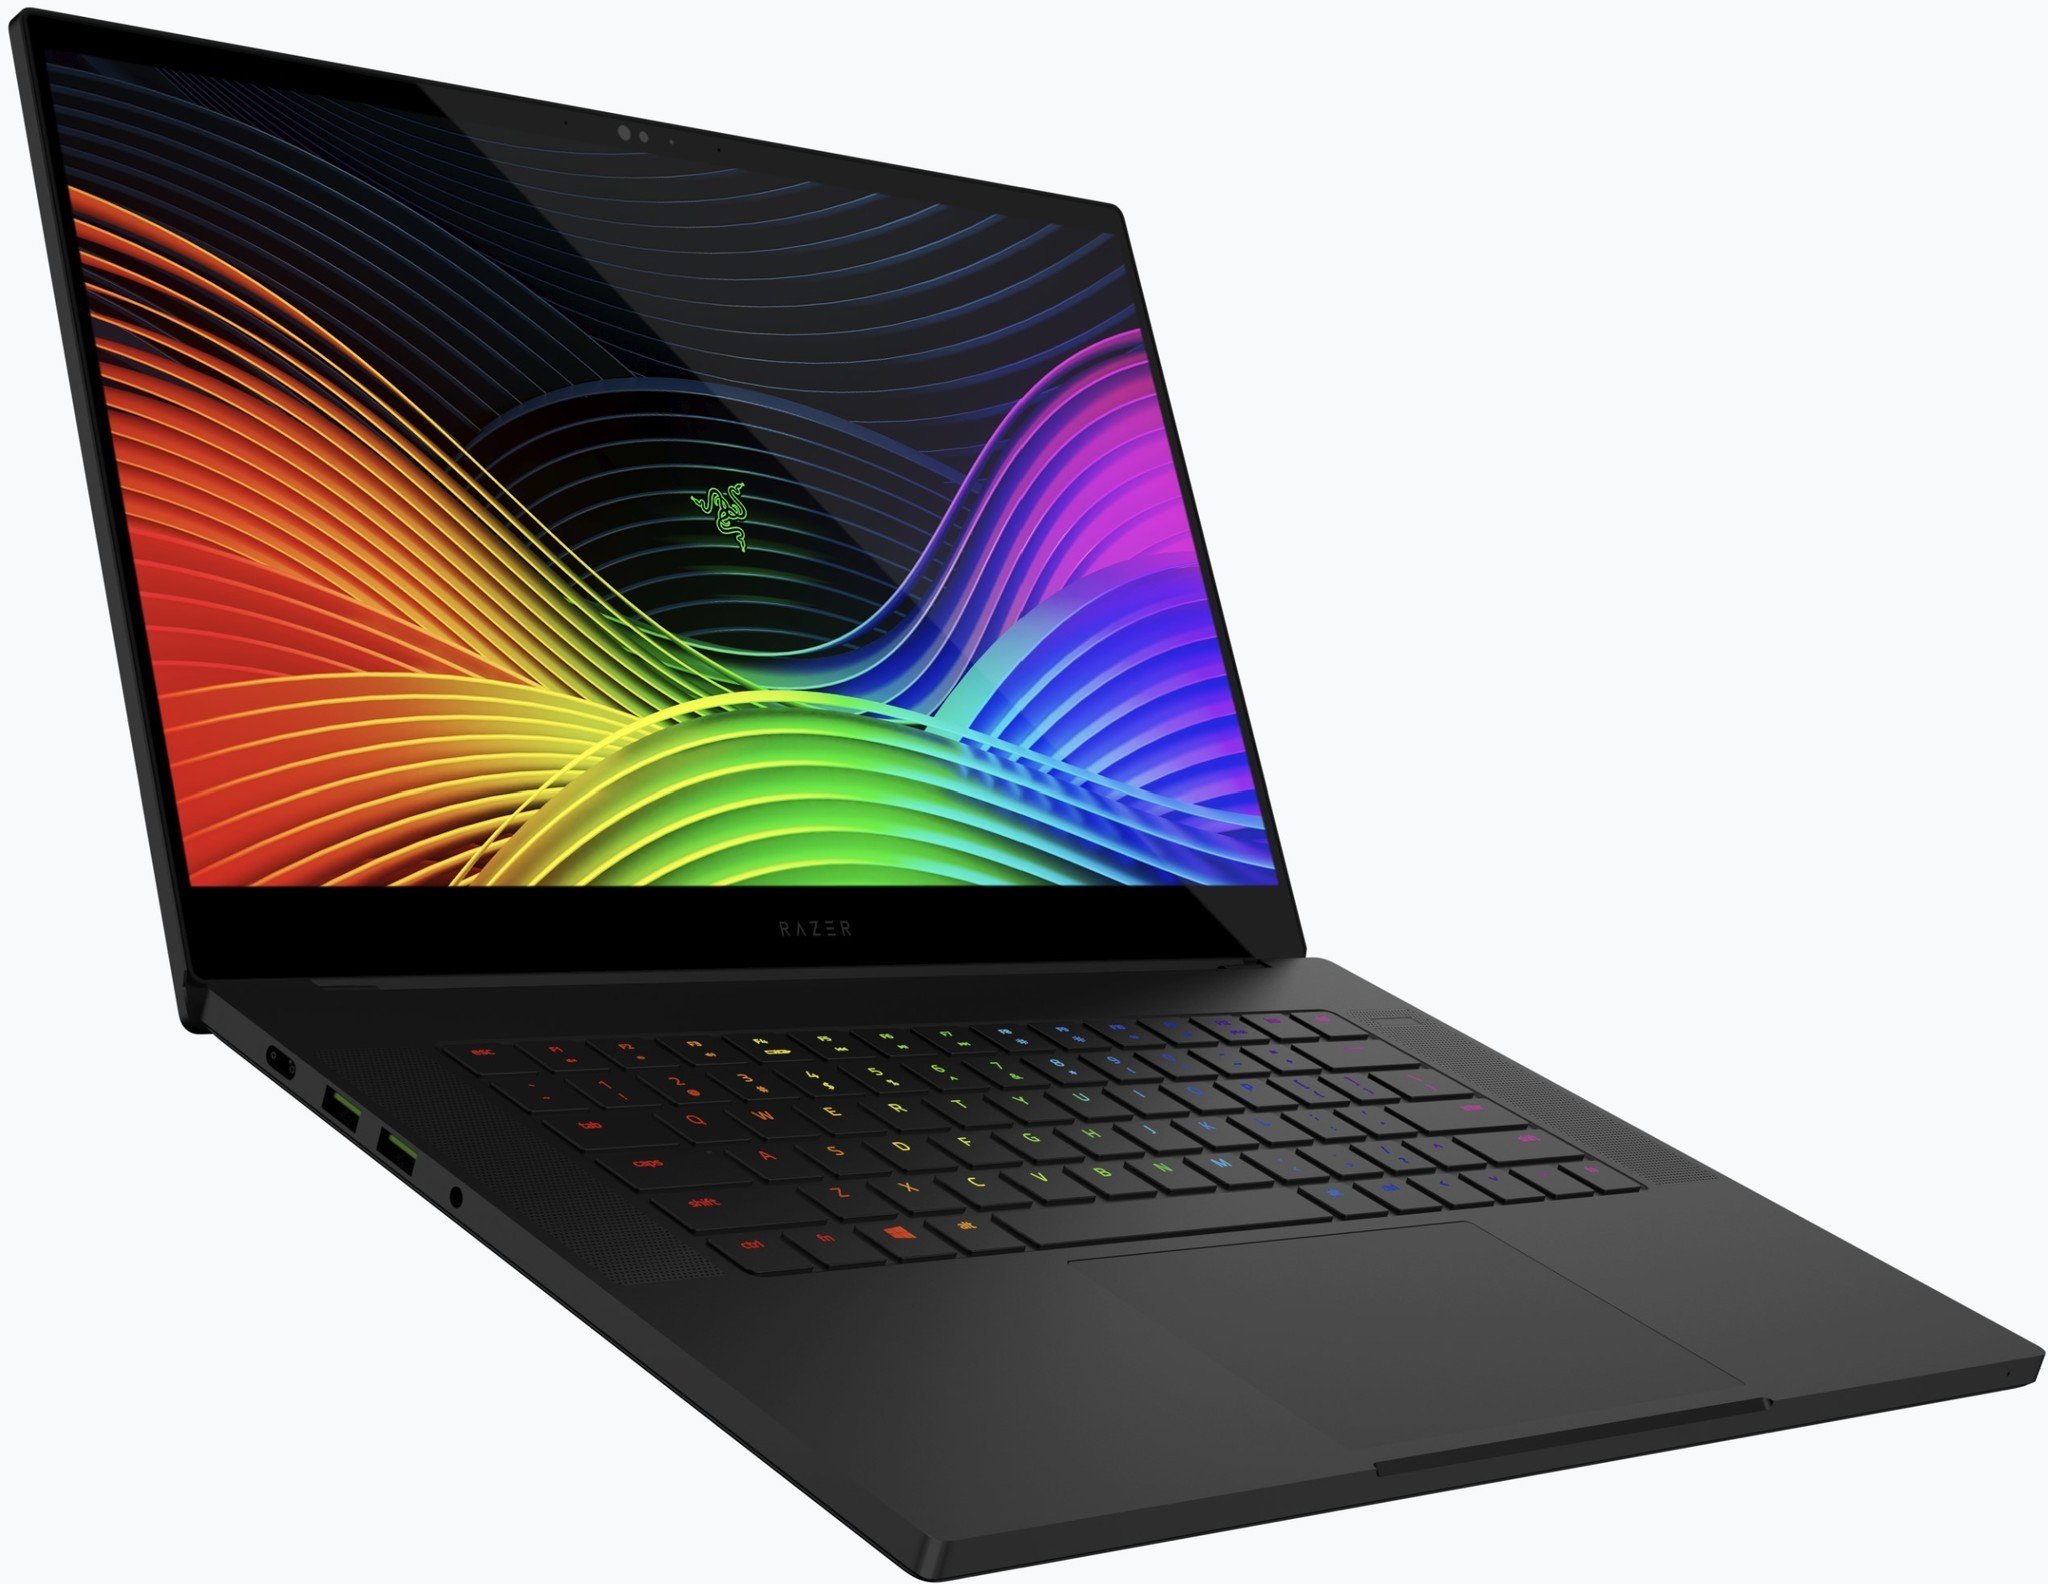 This is the least you can pay for a Razer laptop on Black Friday